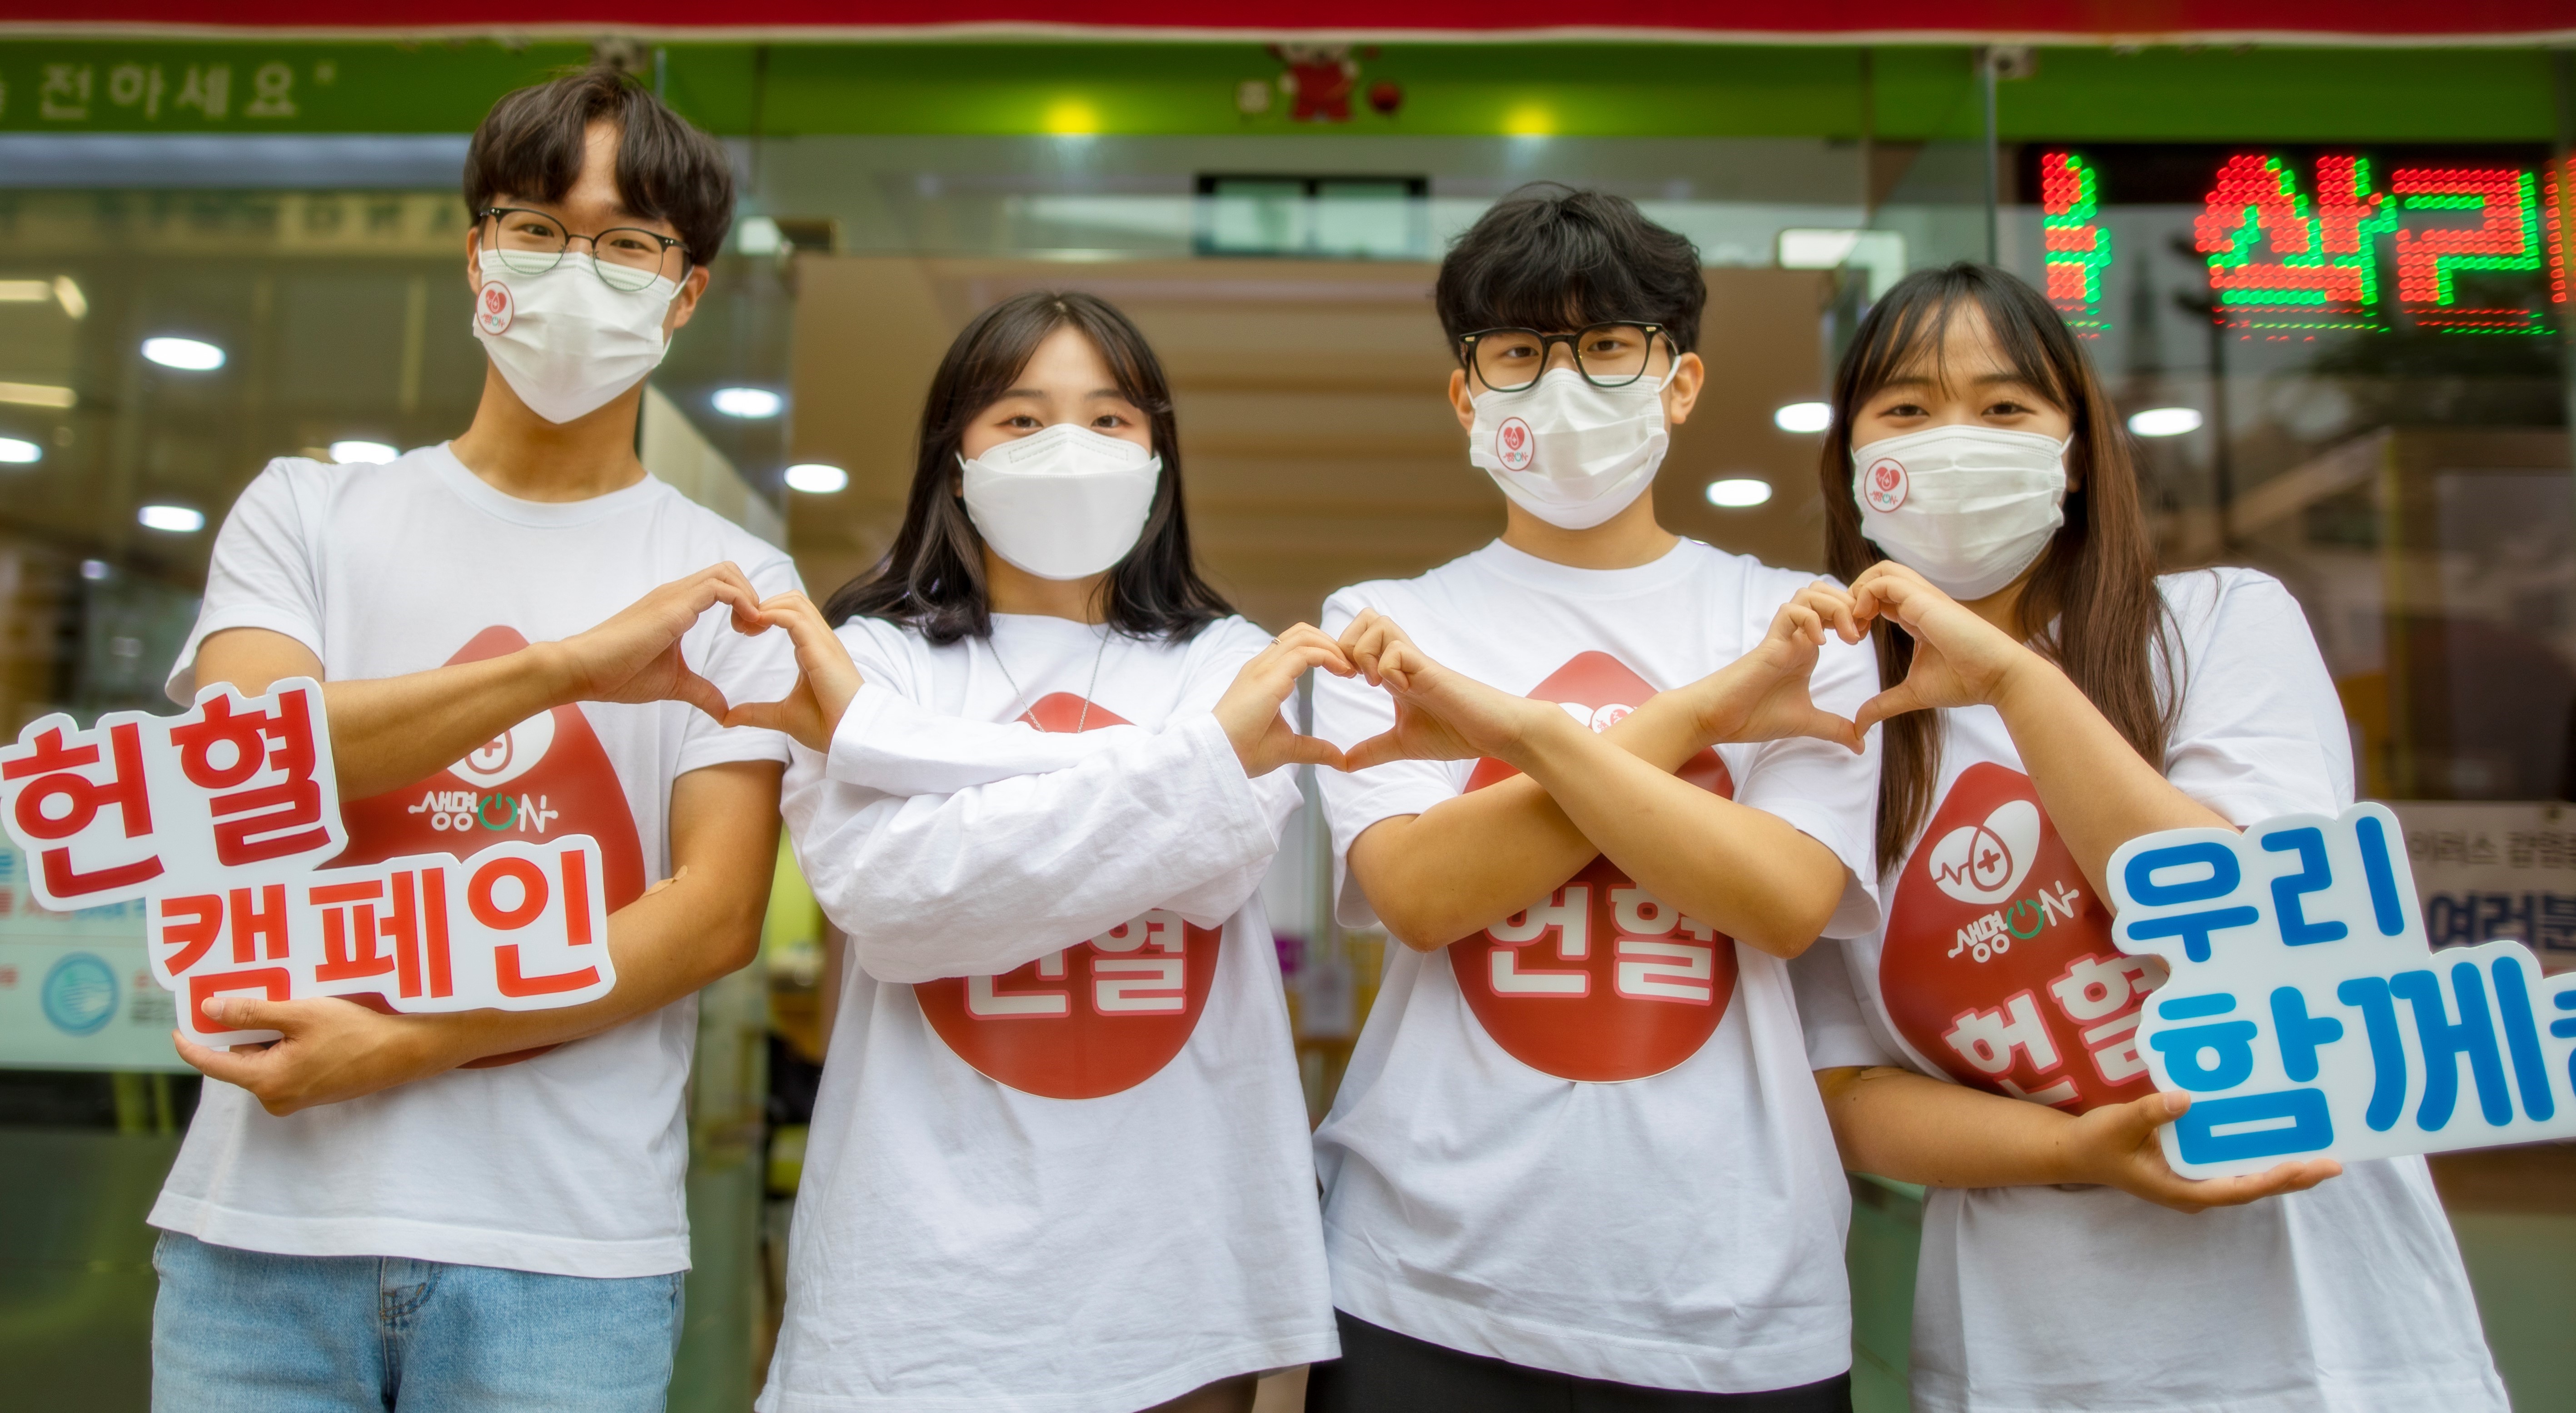 Youth members of Shincheonji Church of Jesus are posed to ask for participation